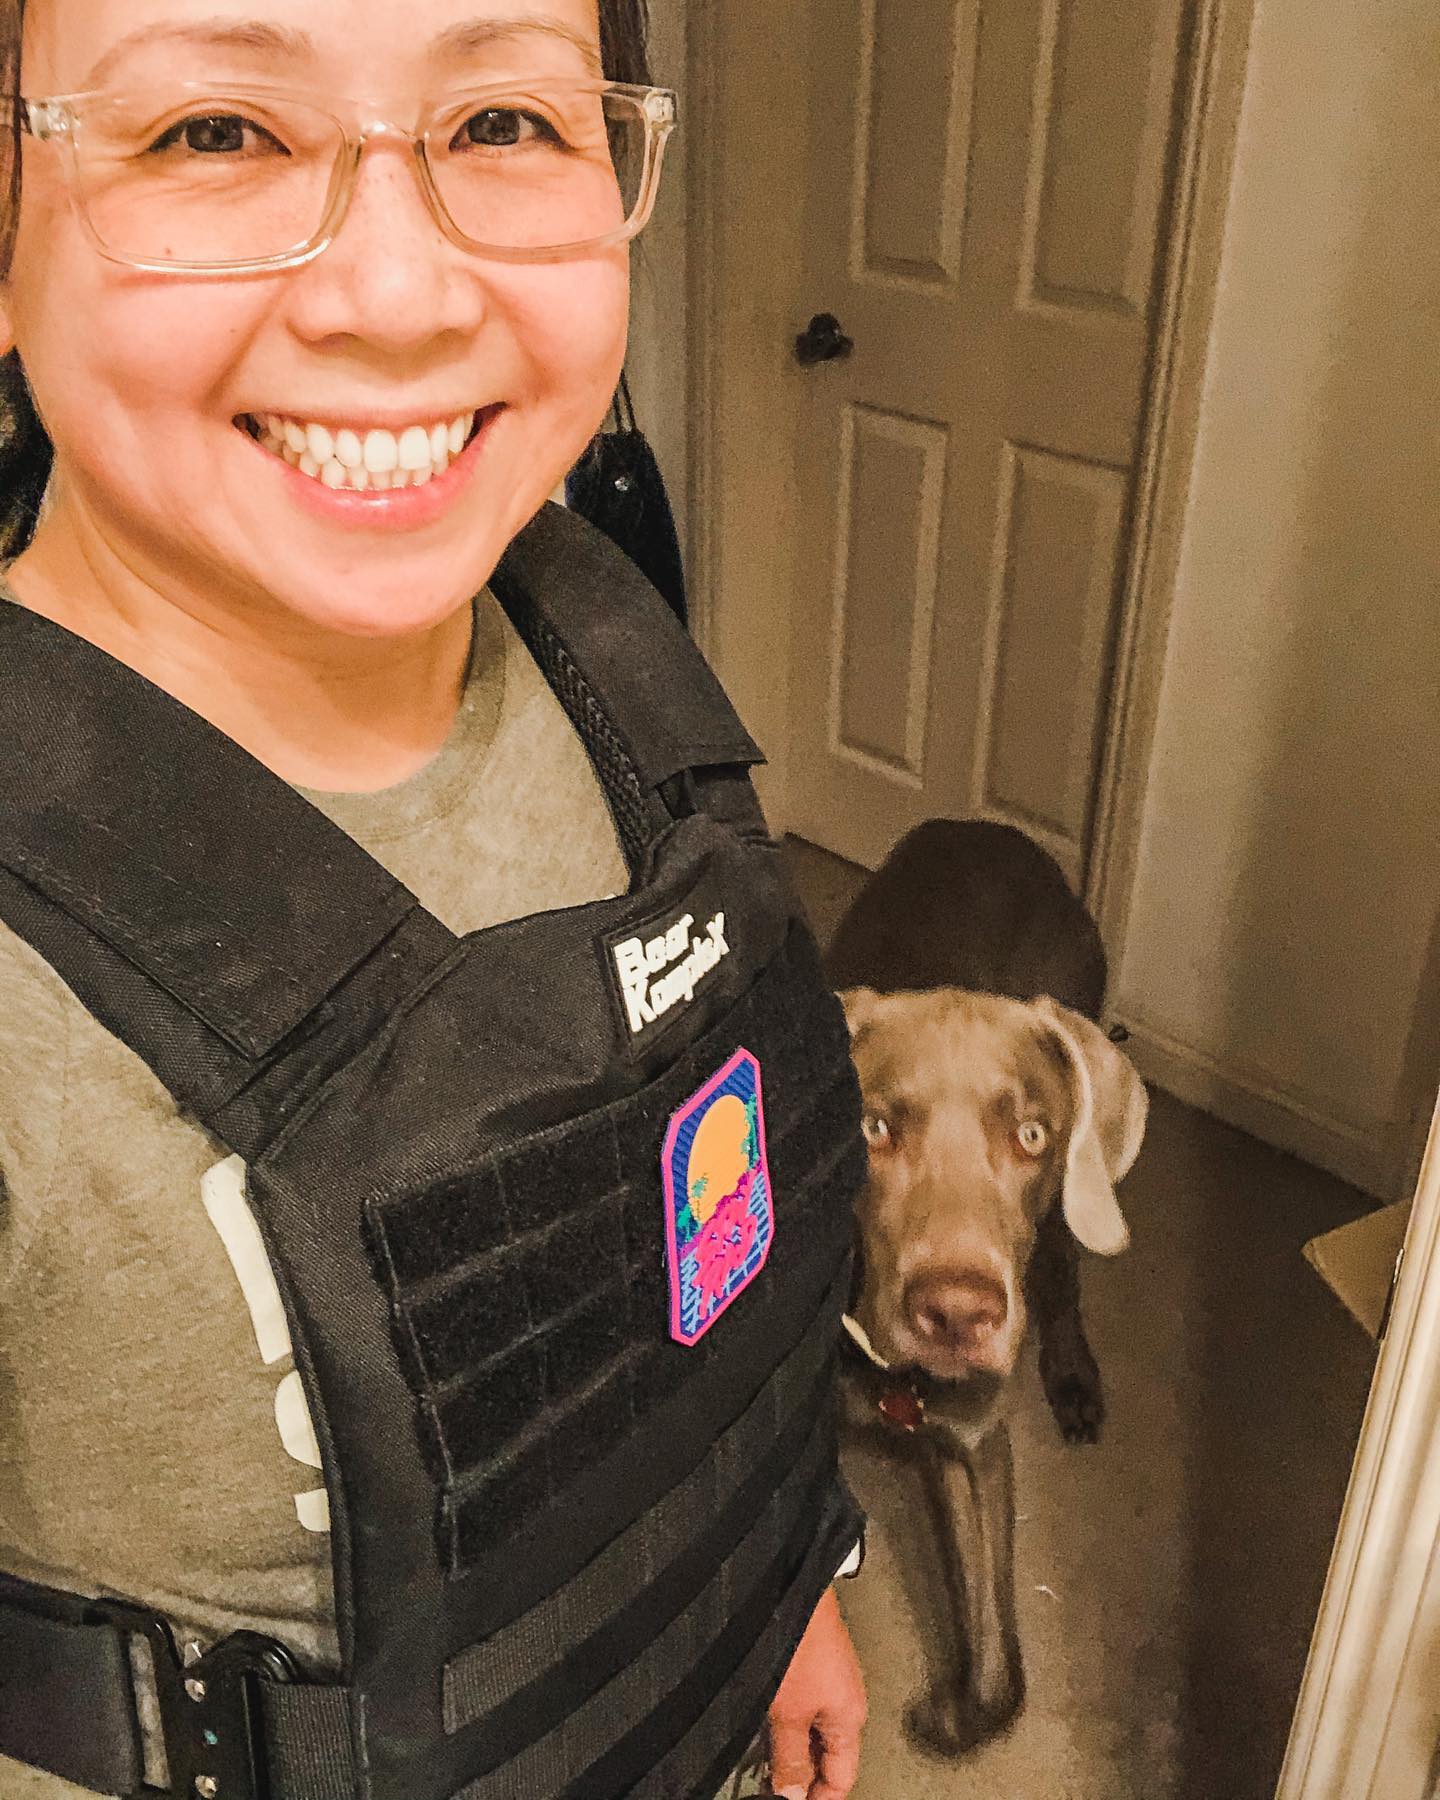 A selfie with my @bearkomplex weight vest +  my new “Stay RAD” patch + kisses from my bébé = happiness#crosstraining #weightvest #bearkomplex #weimaraner #weimsofinstagram [instagram]